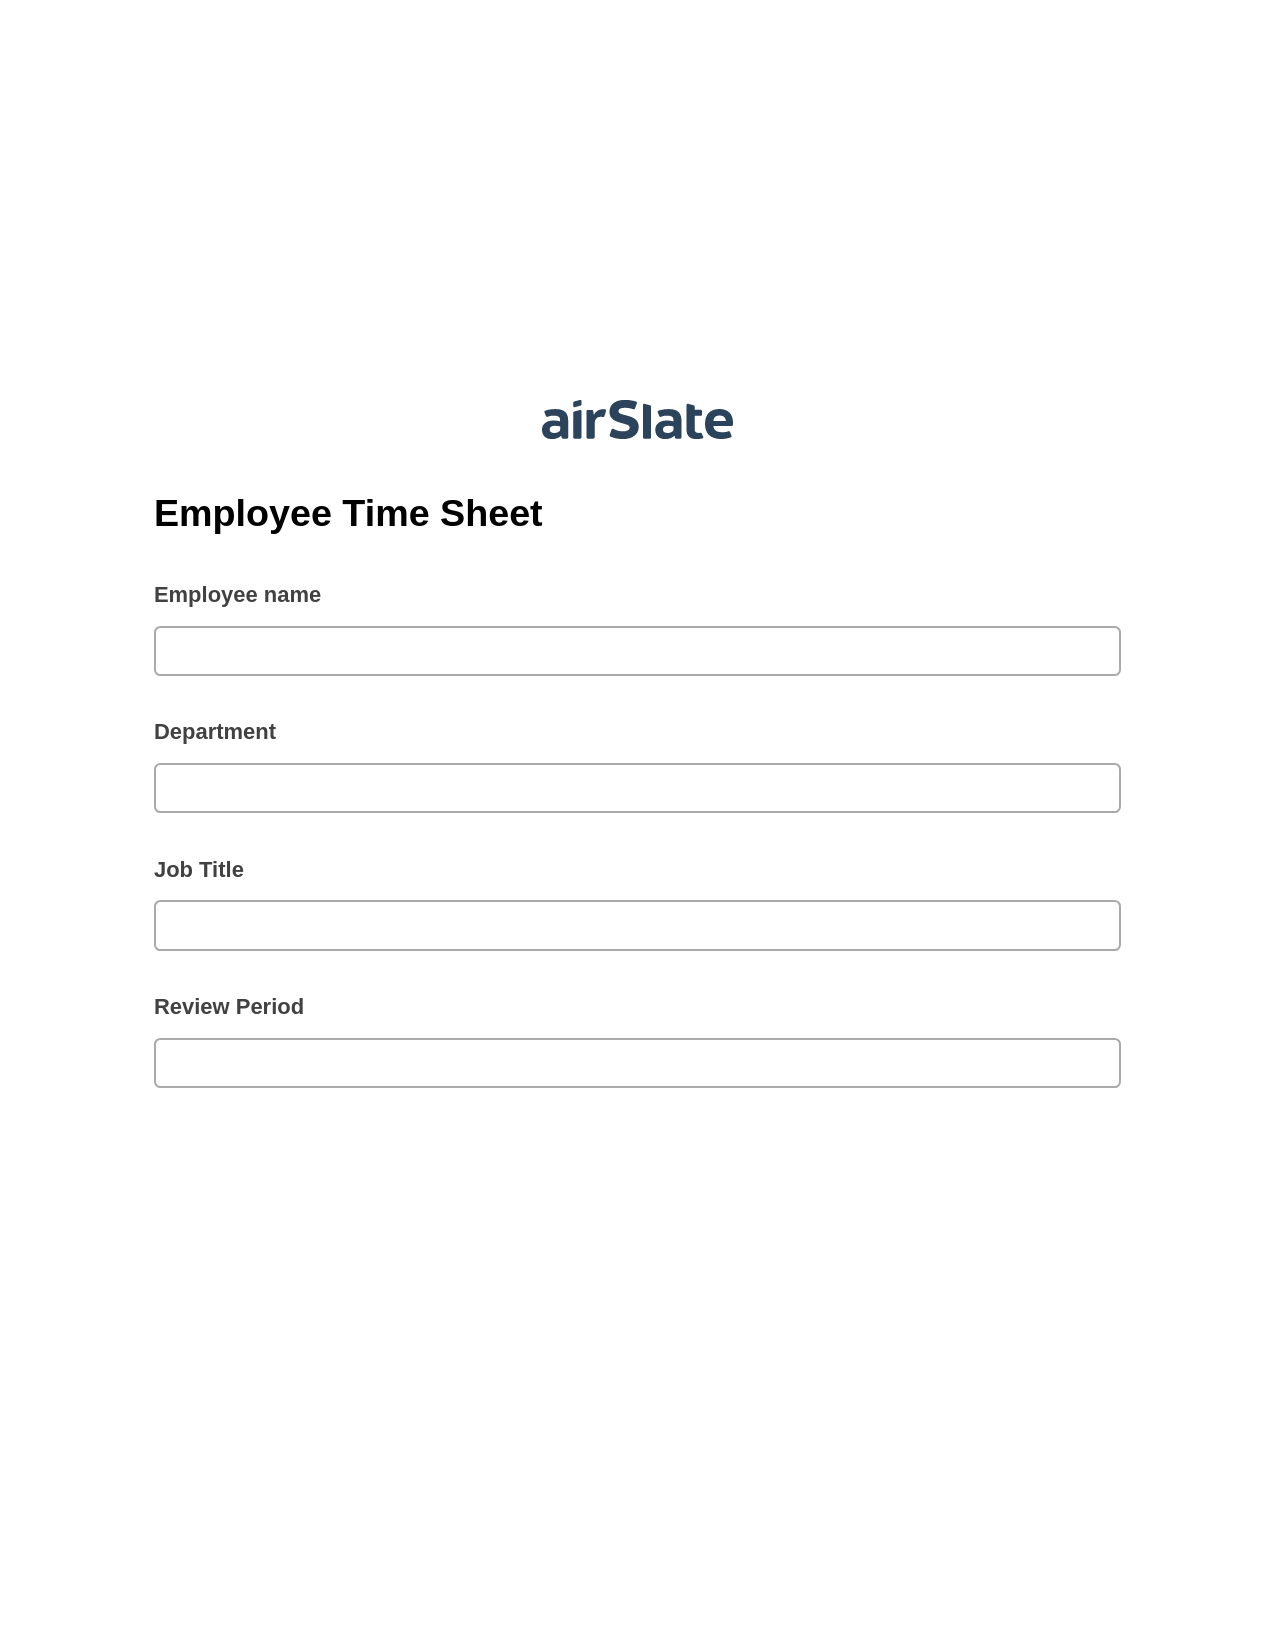 Employee Time Sheet Pre-fill from another Slate Bot, Create Salesforce Records Bot, Export to Salesforce Record Bot